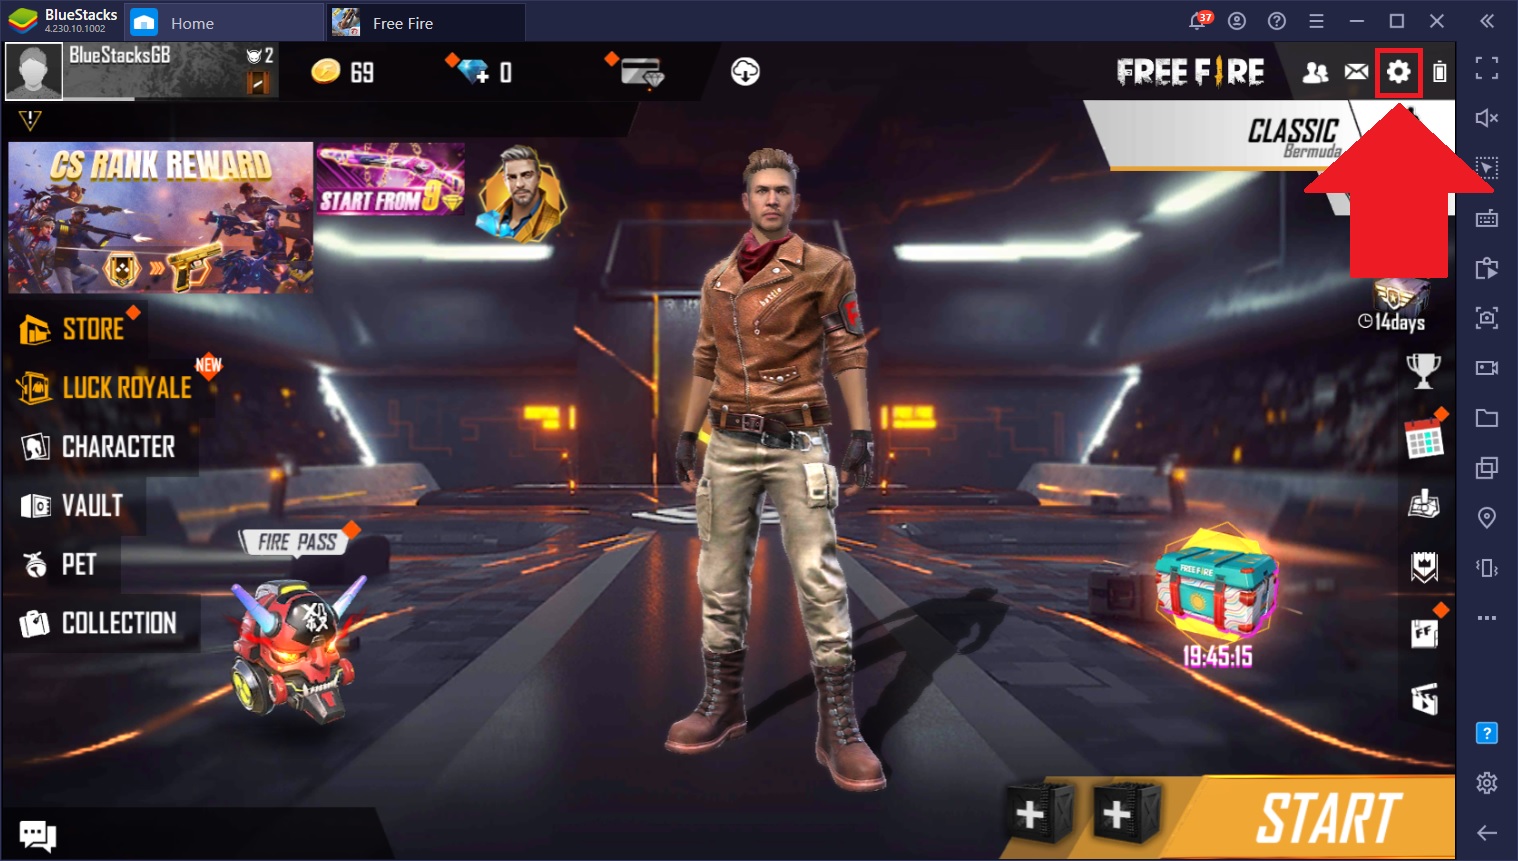 Play Free Fire at High FPS on Android Emulator-Game Guides-LDPlayer